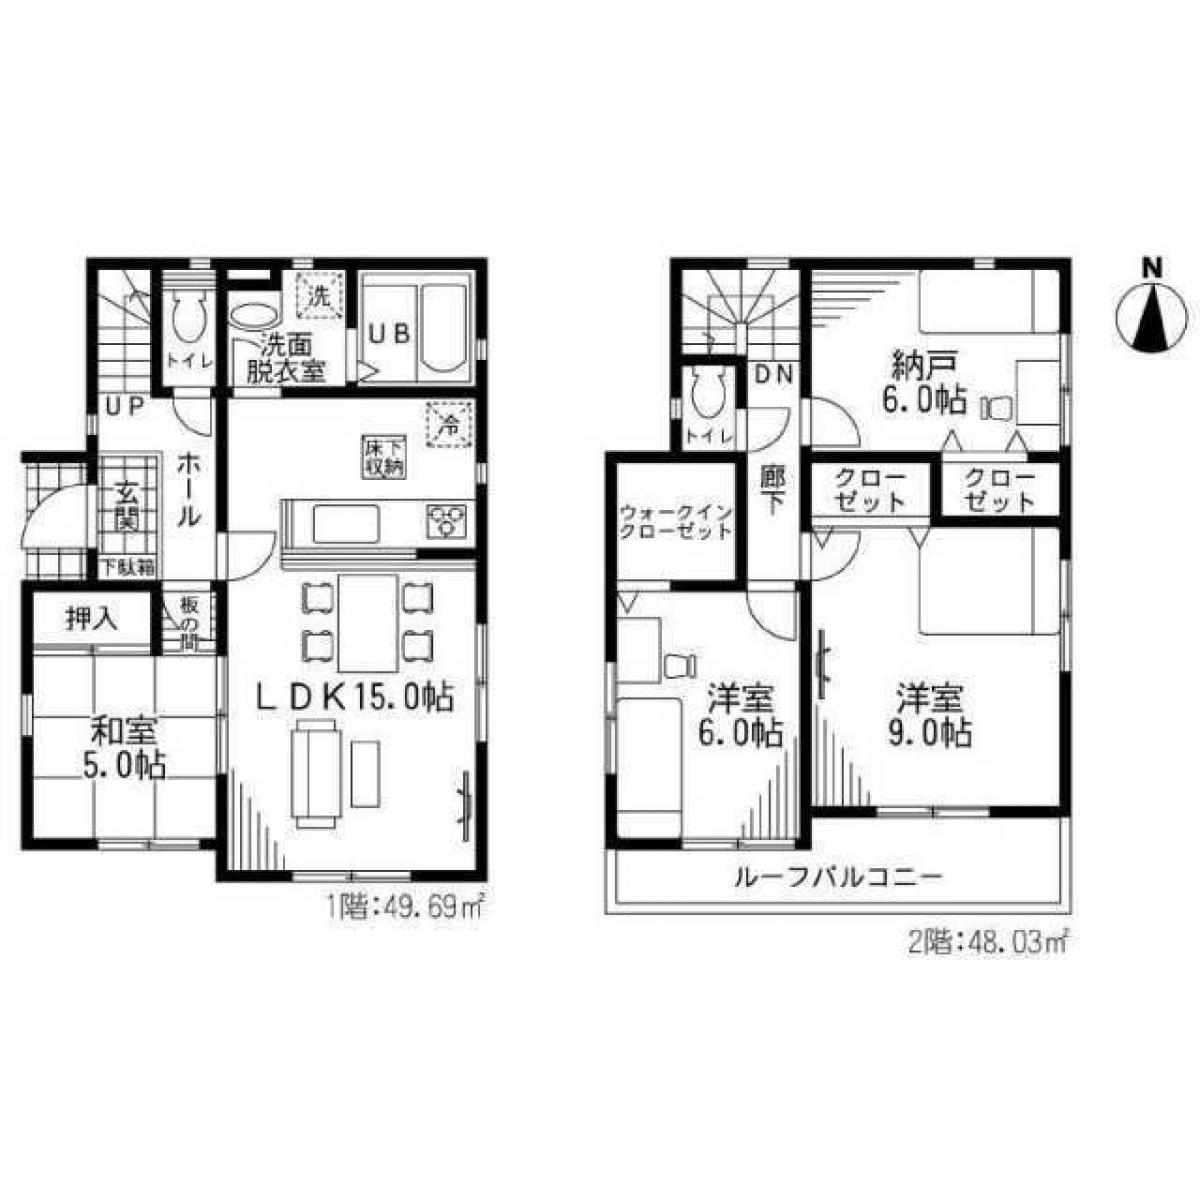 Picture of Home For Sale in Moriguchi Shi, Osaka, Japan